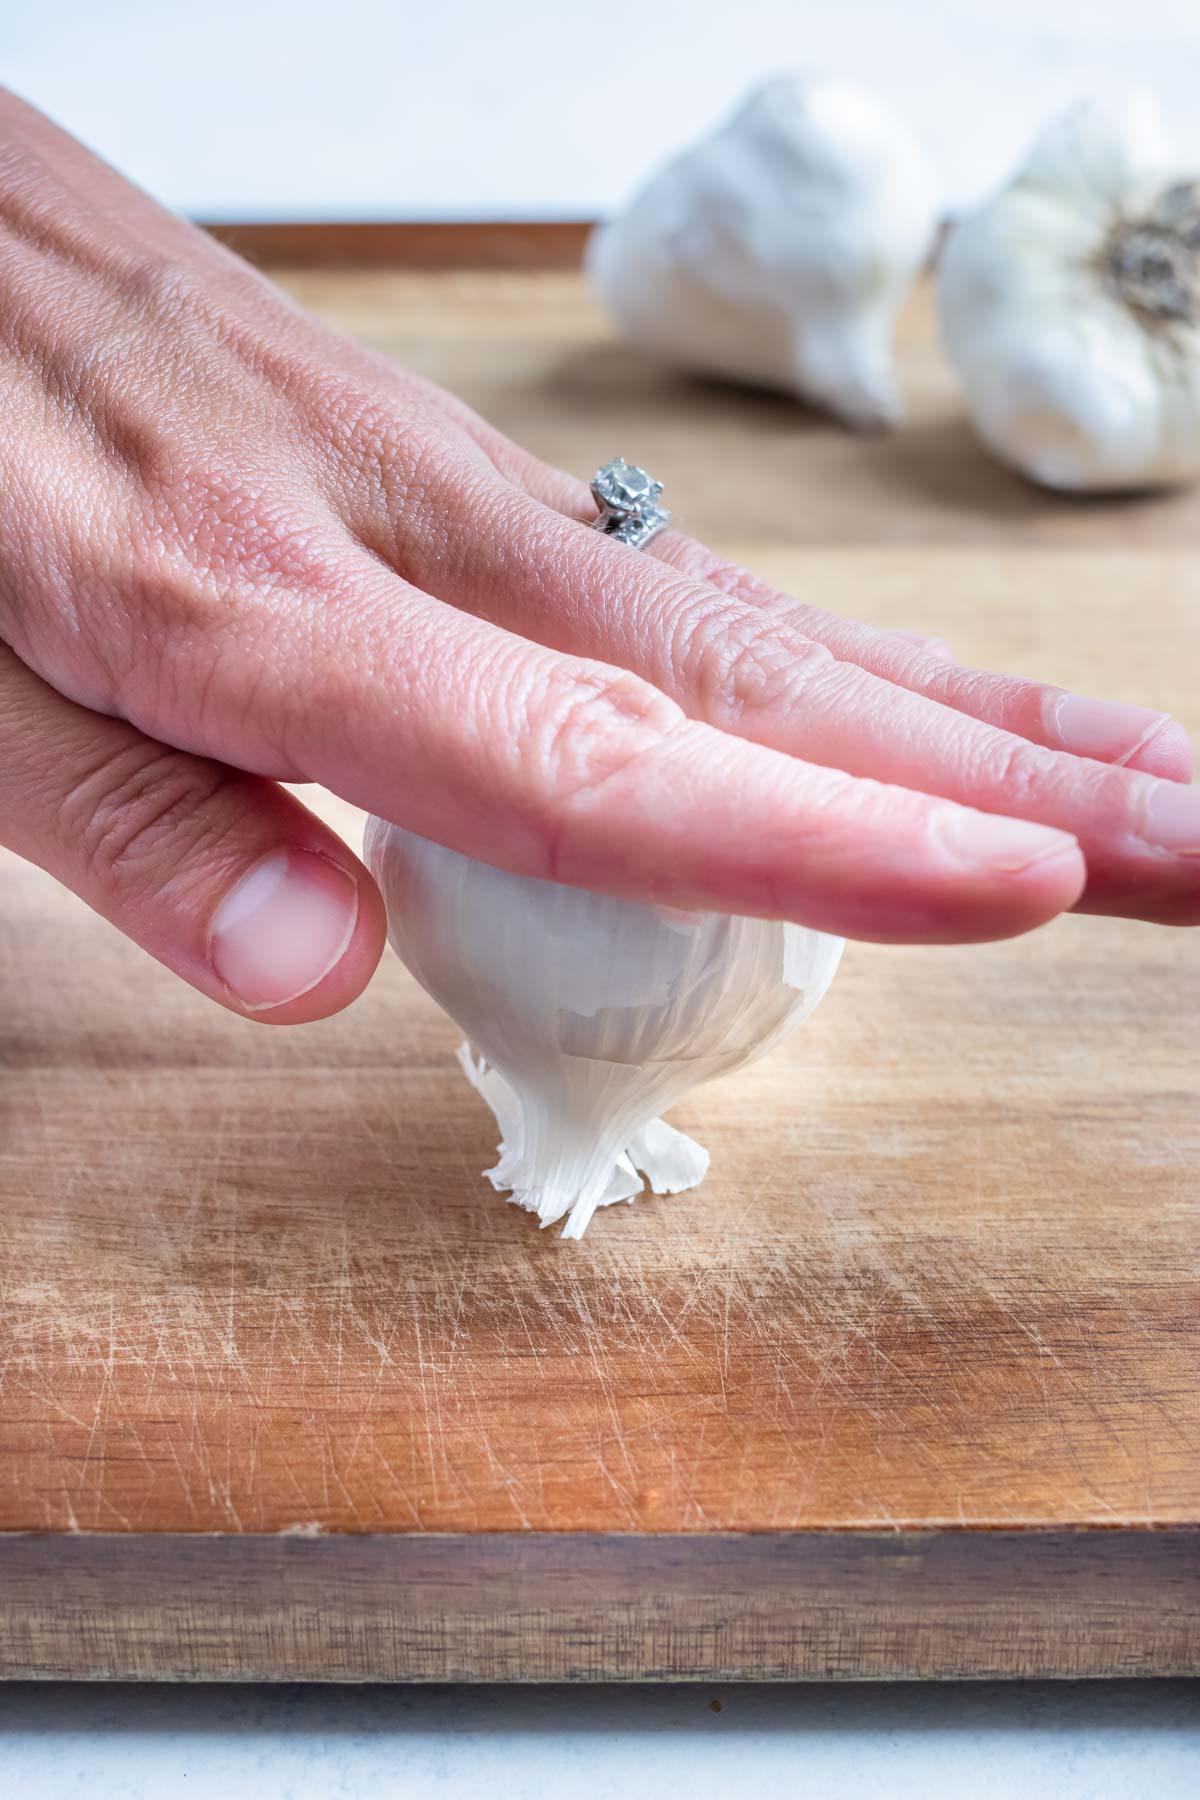 The full garlic bulb is pushed down with your hand.